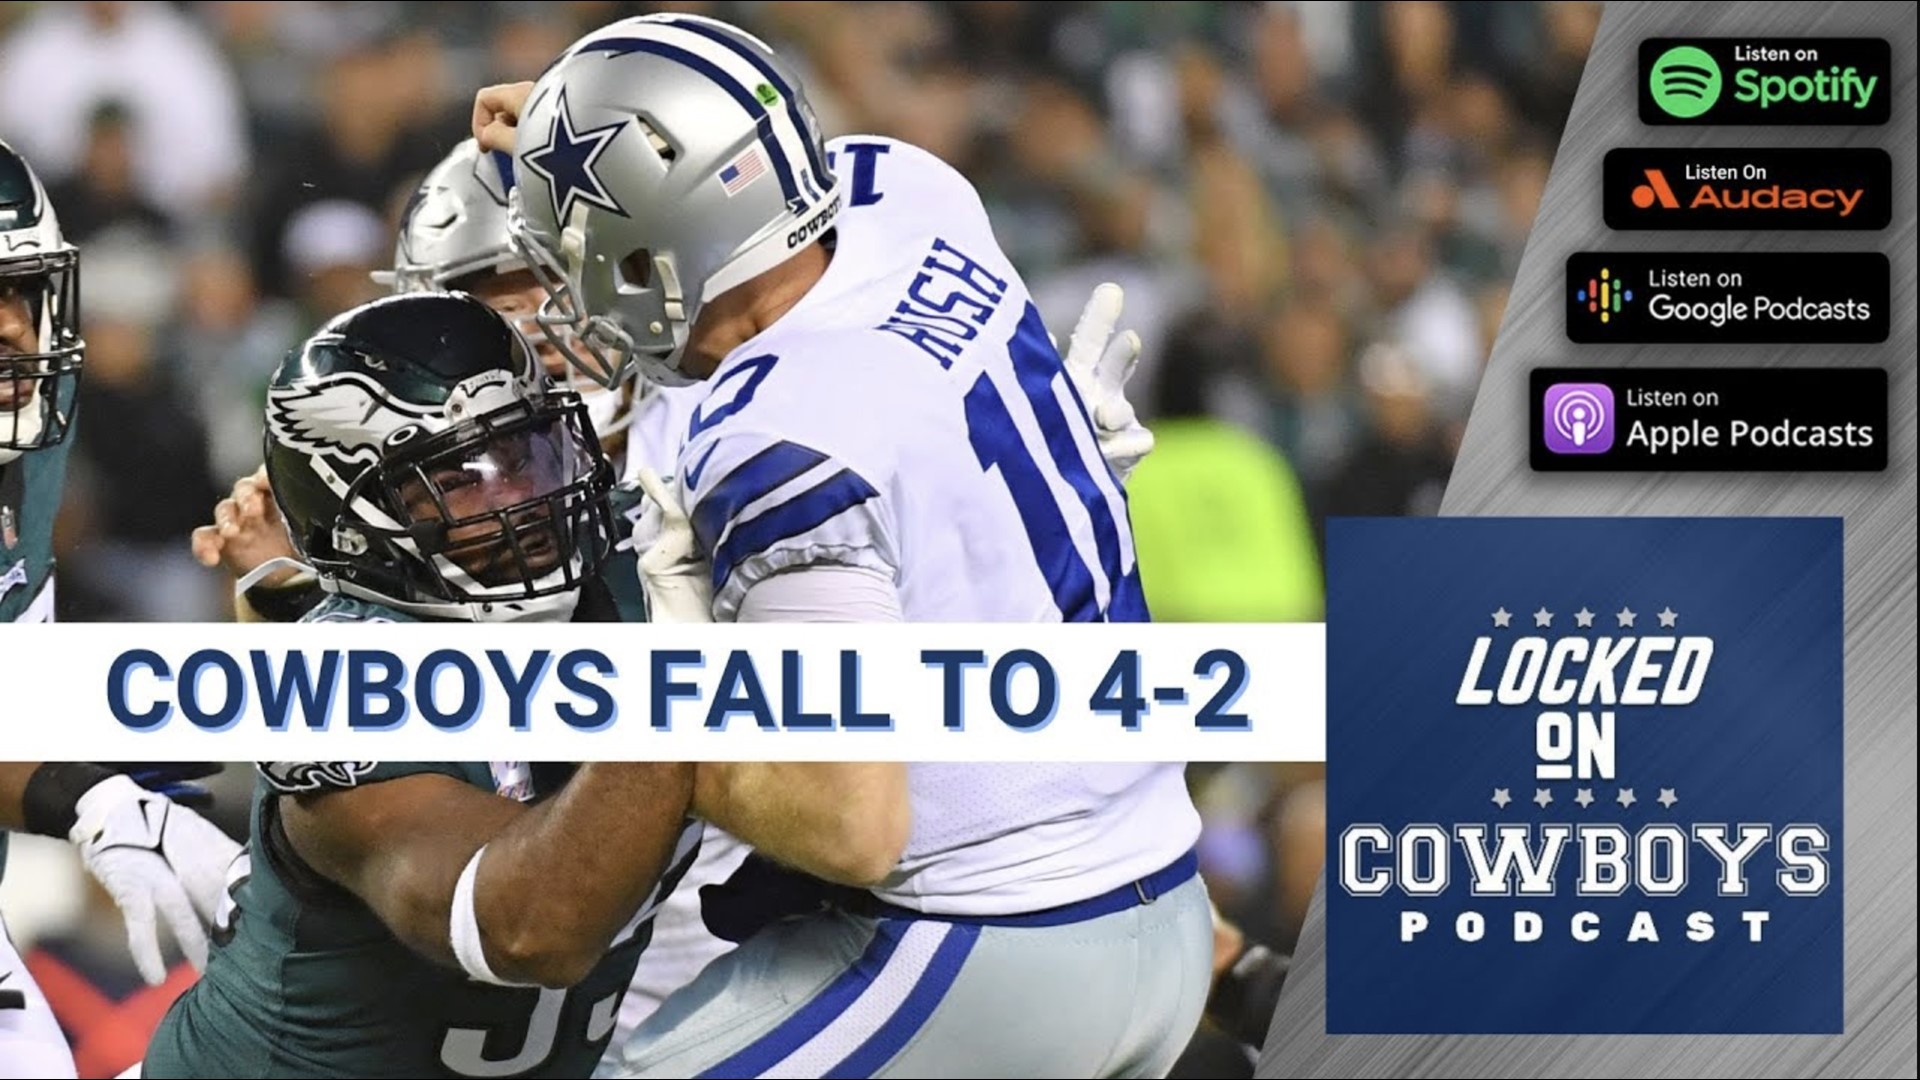 Marcus Mosher and Landon McCool discuss the Week 6 loss by the Dallas Cowboys. How poorly did Cooper Rush play against the Eagles?